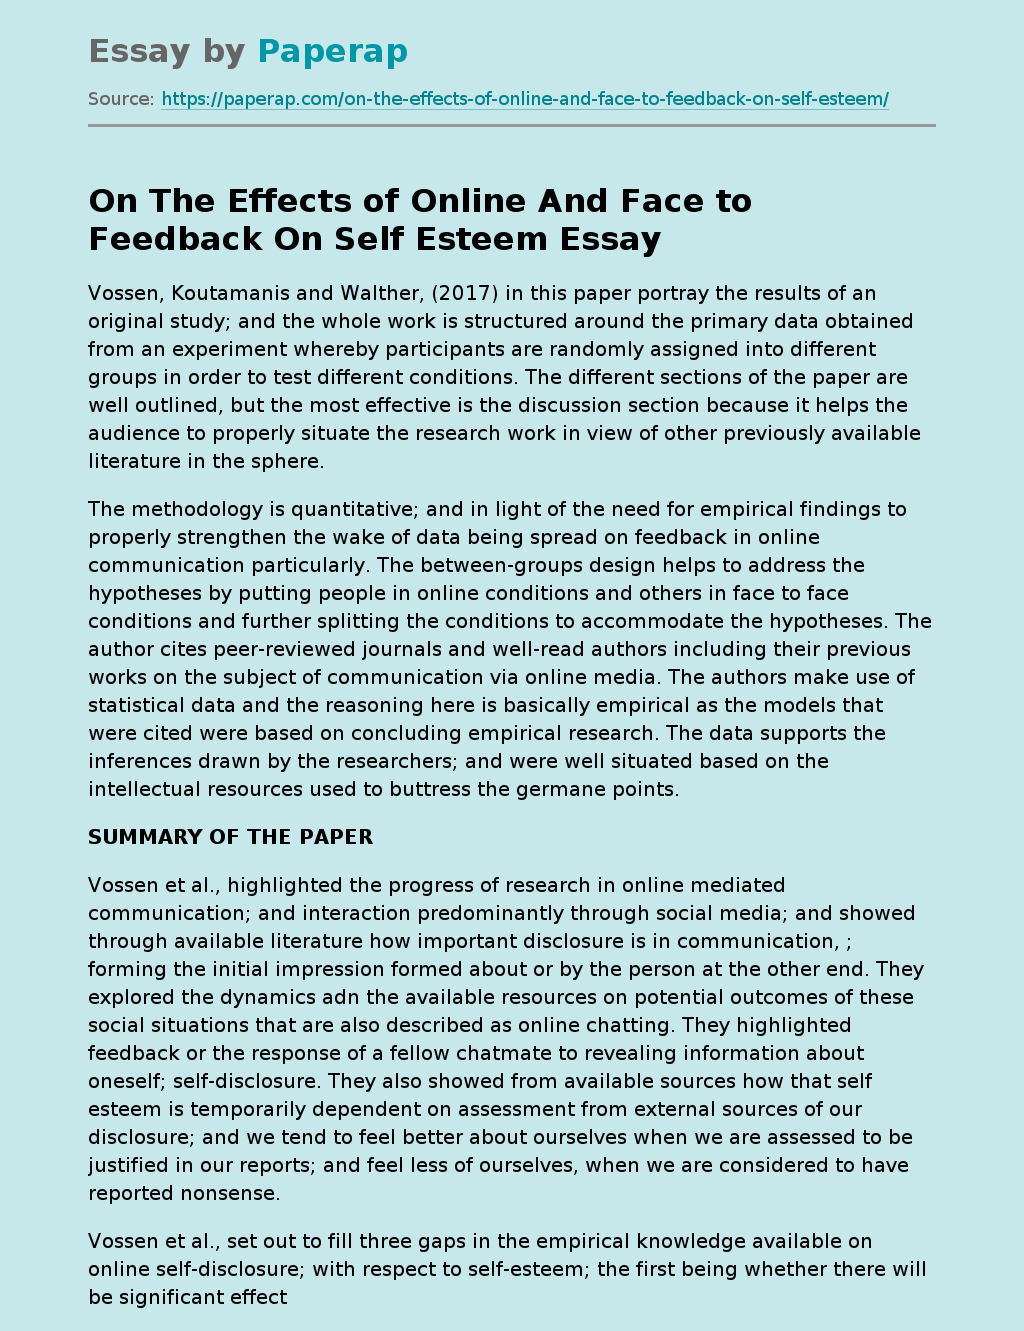 On The Effects of Online And Face to Feedback On Self Esteem